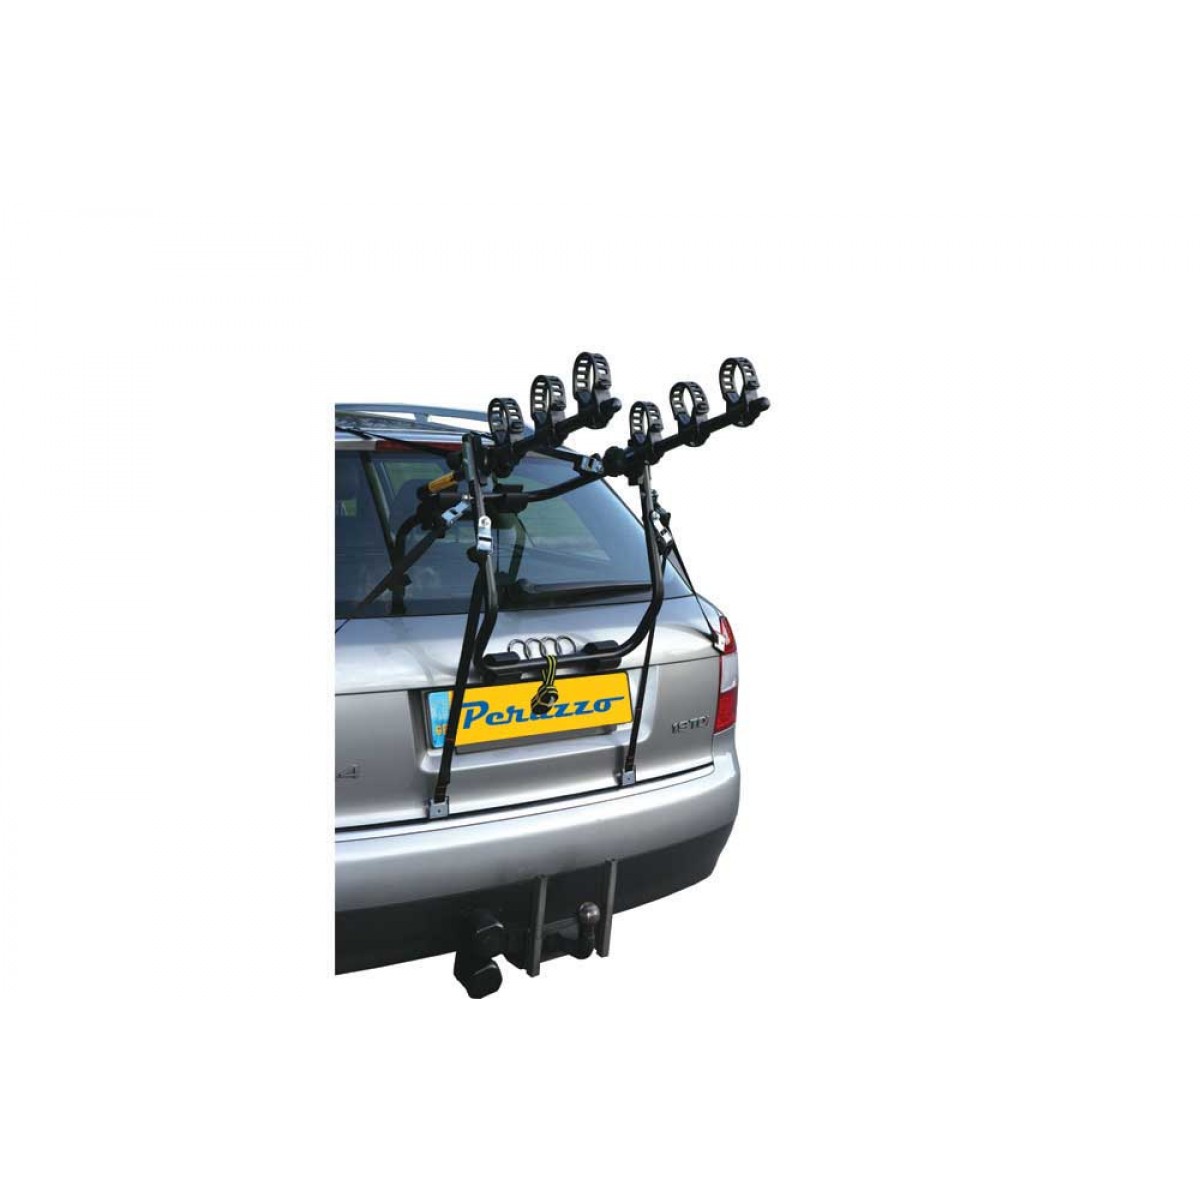 3 cycle carrier